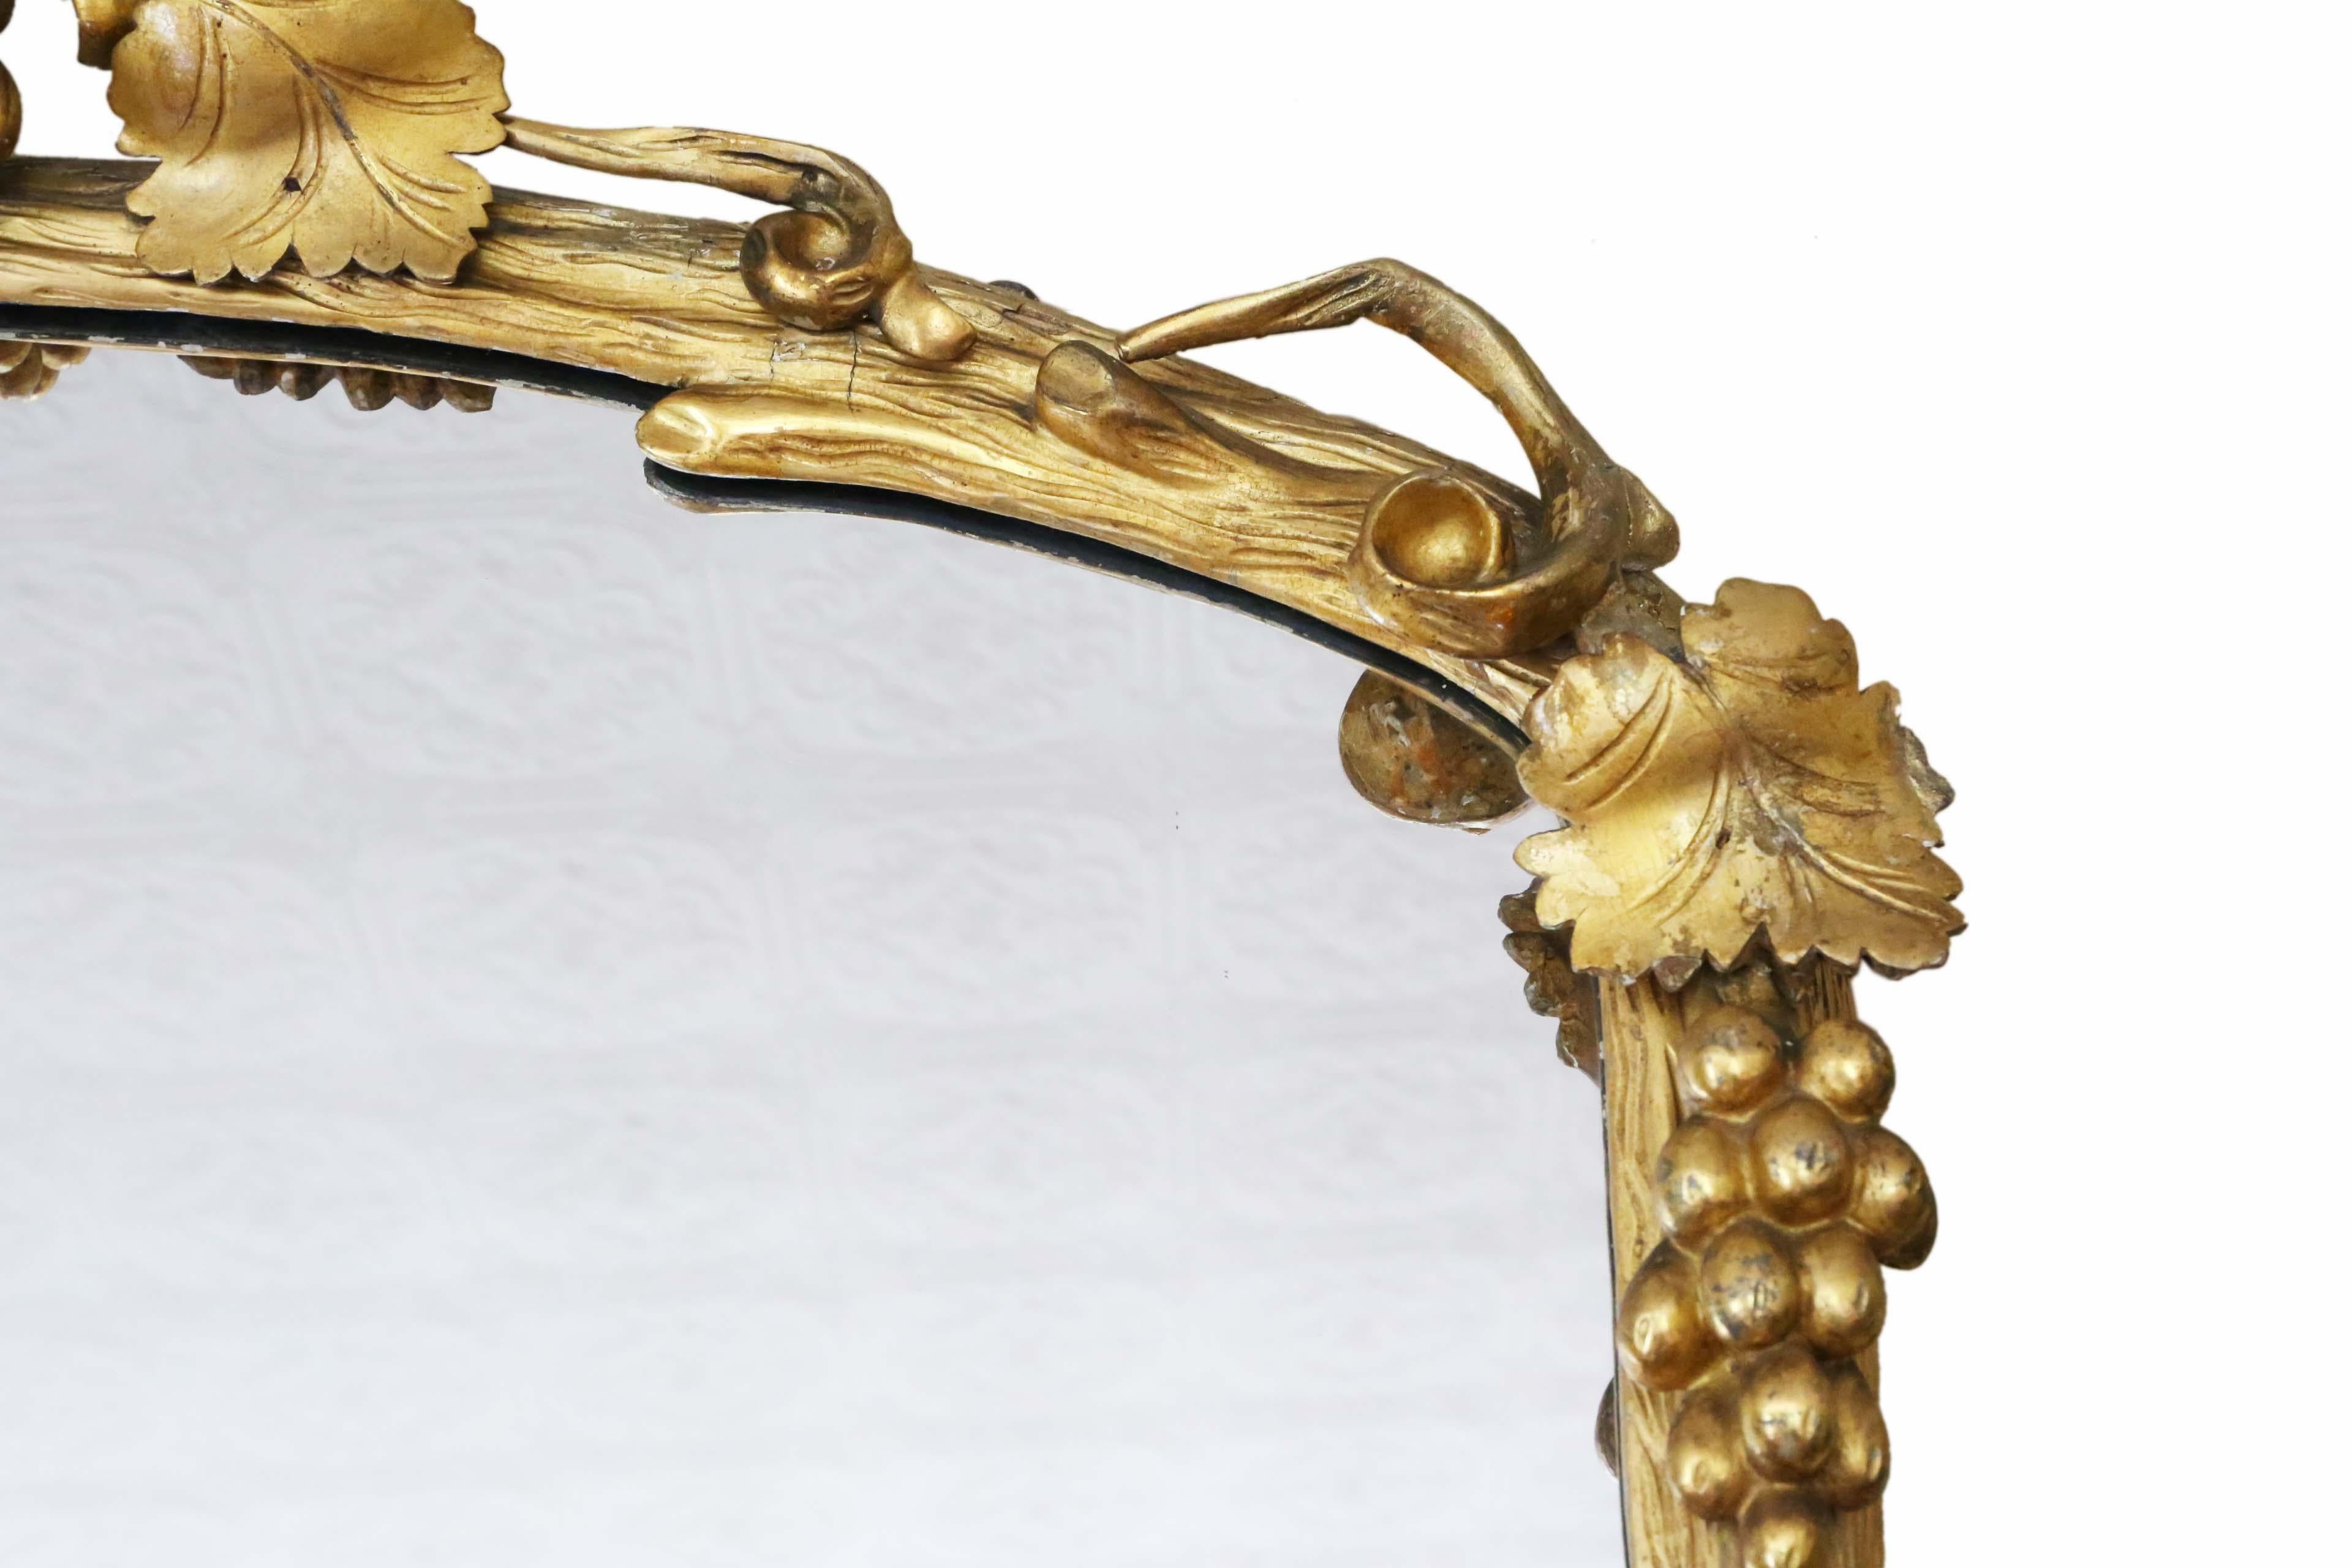 Giltwood Antique 19th Century Vine Gilt Overmantel Wall Mirror Very Large Fine Quality